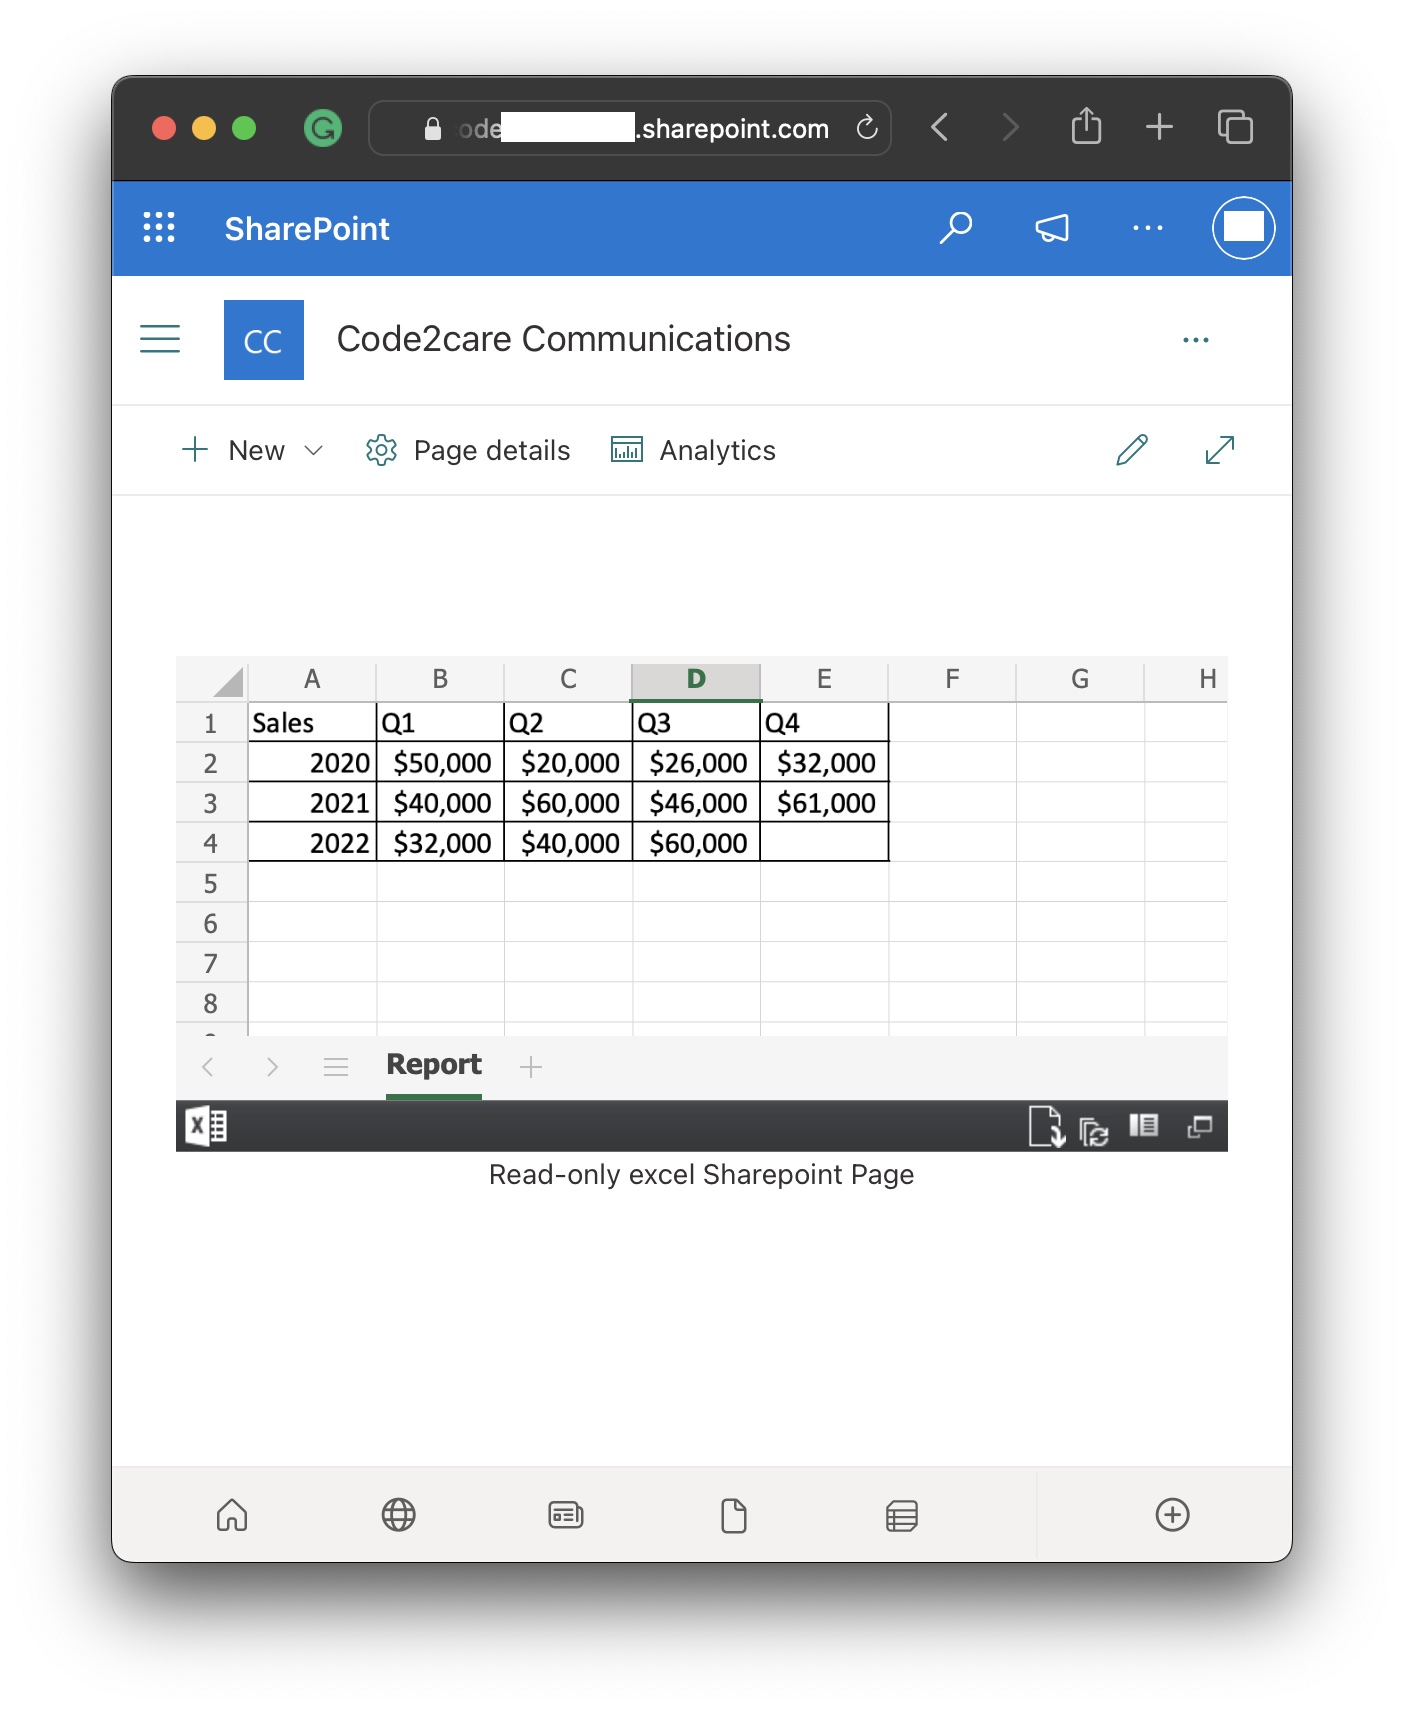 Display Excel Spreadsheet on Sharepoint Page